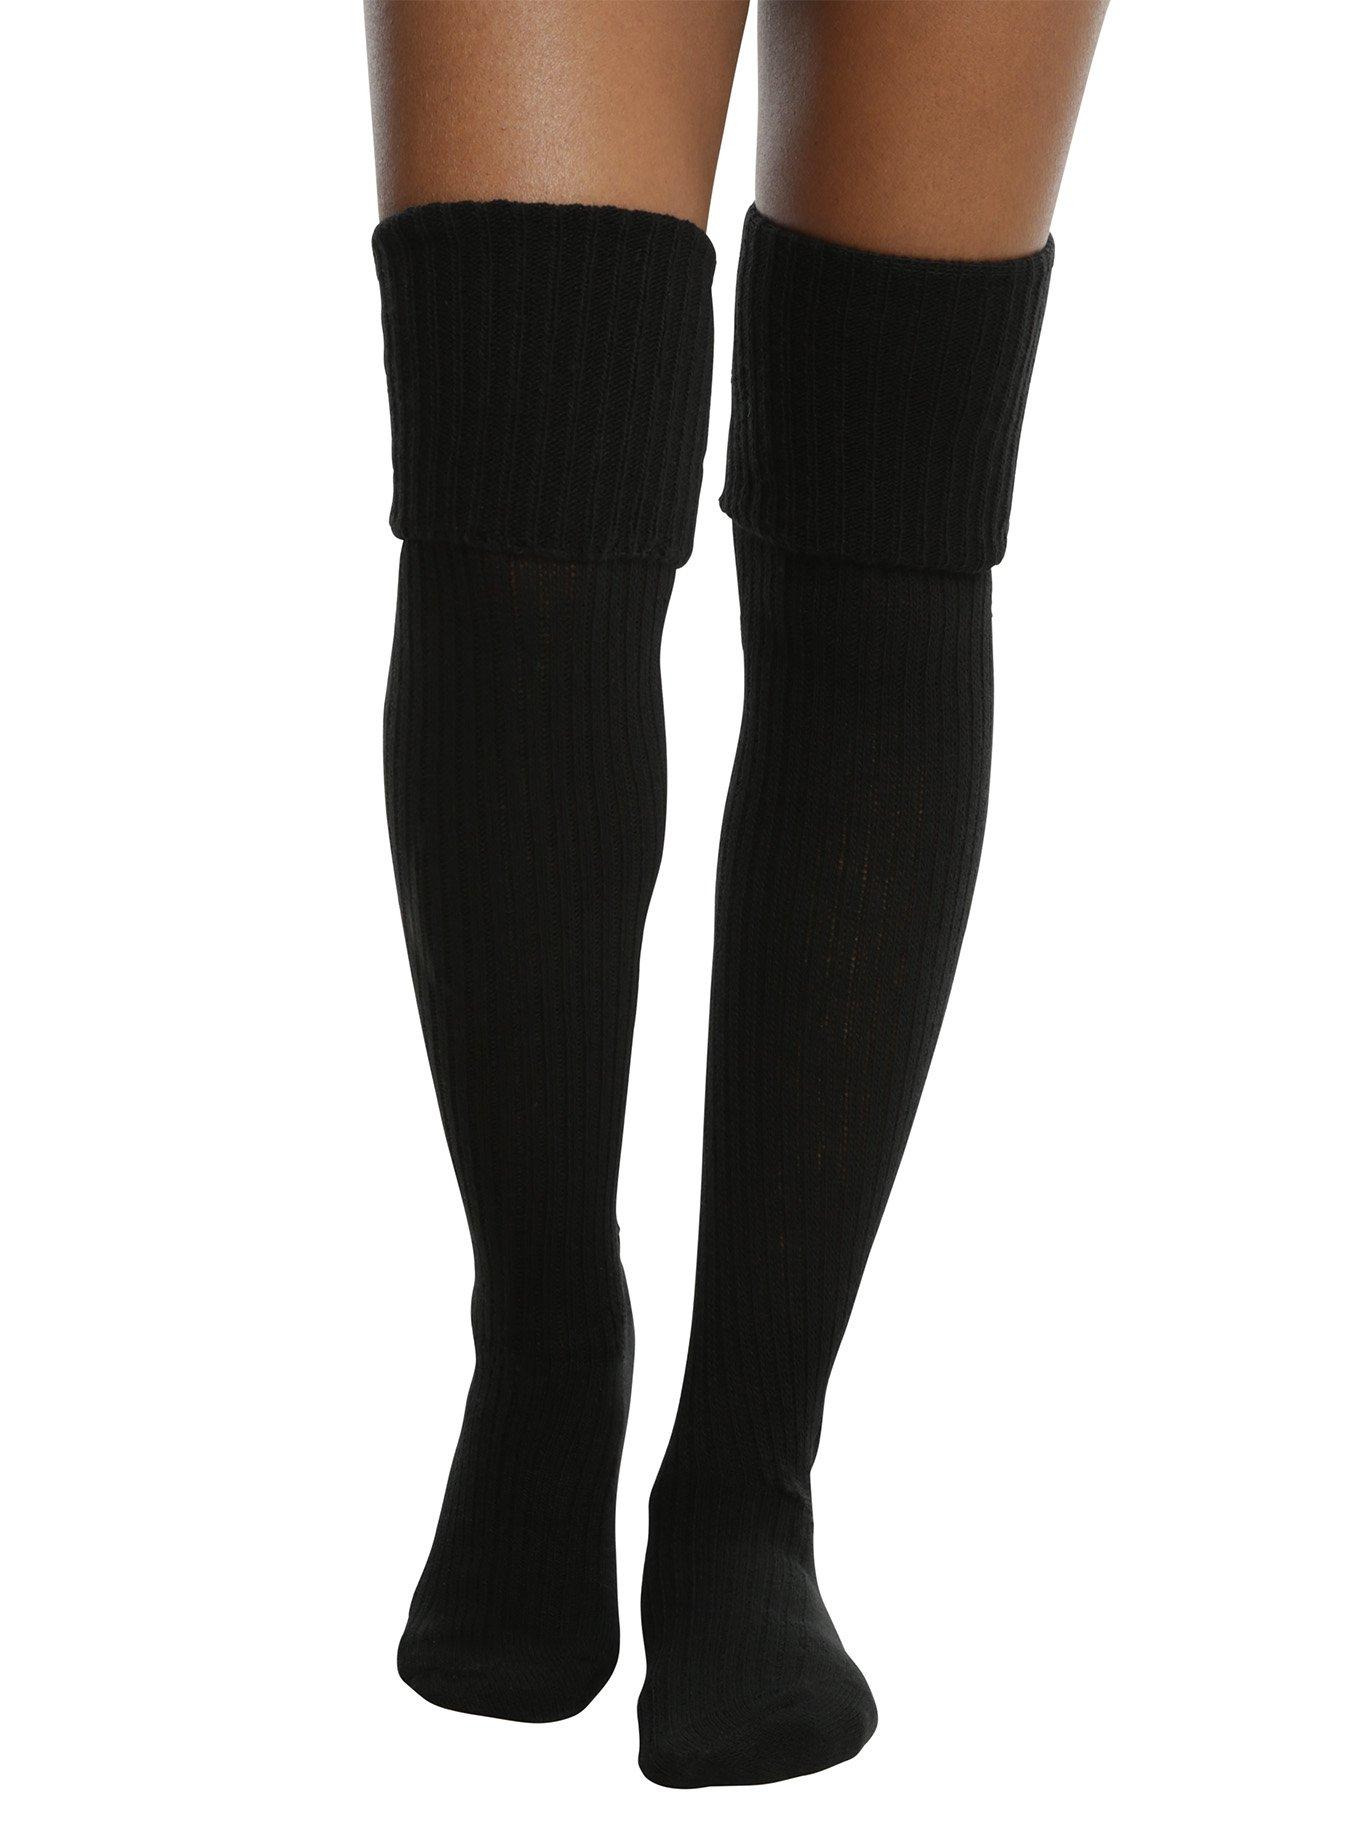 Black Knit Cuffed Over-The-Knee Sweater Socks, , hi-res